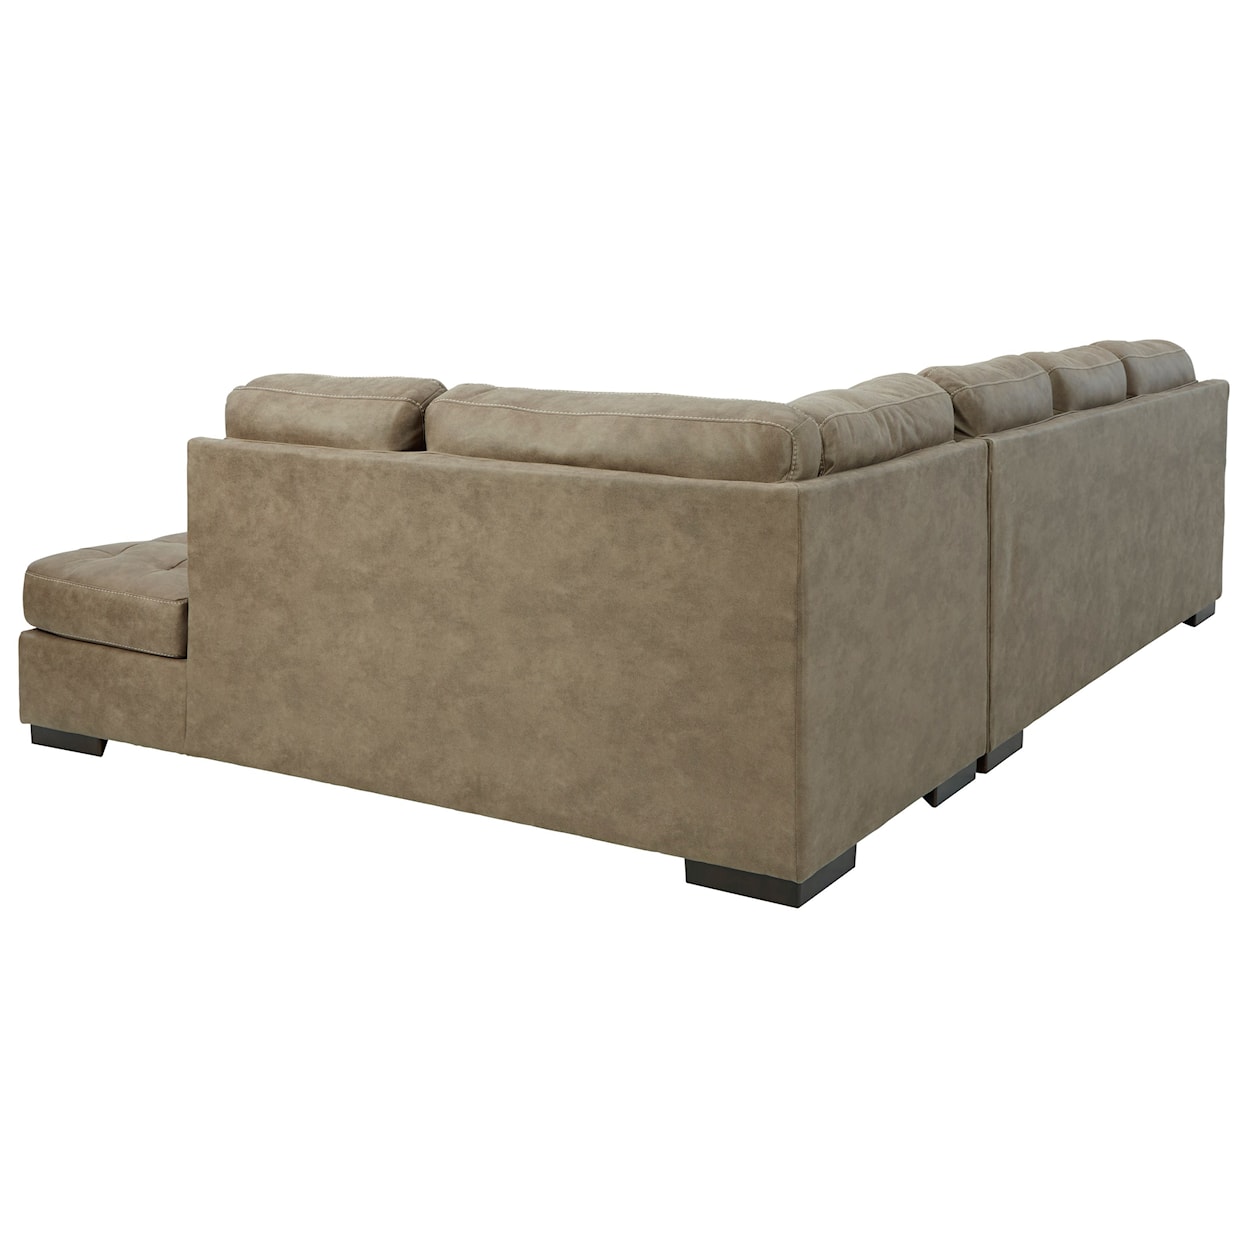 StyleLine Maderla 2-Piece Sectional with Chaise